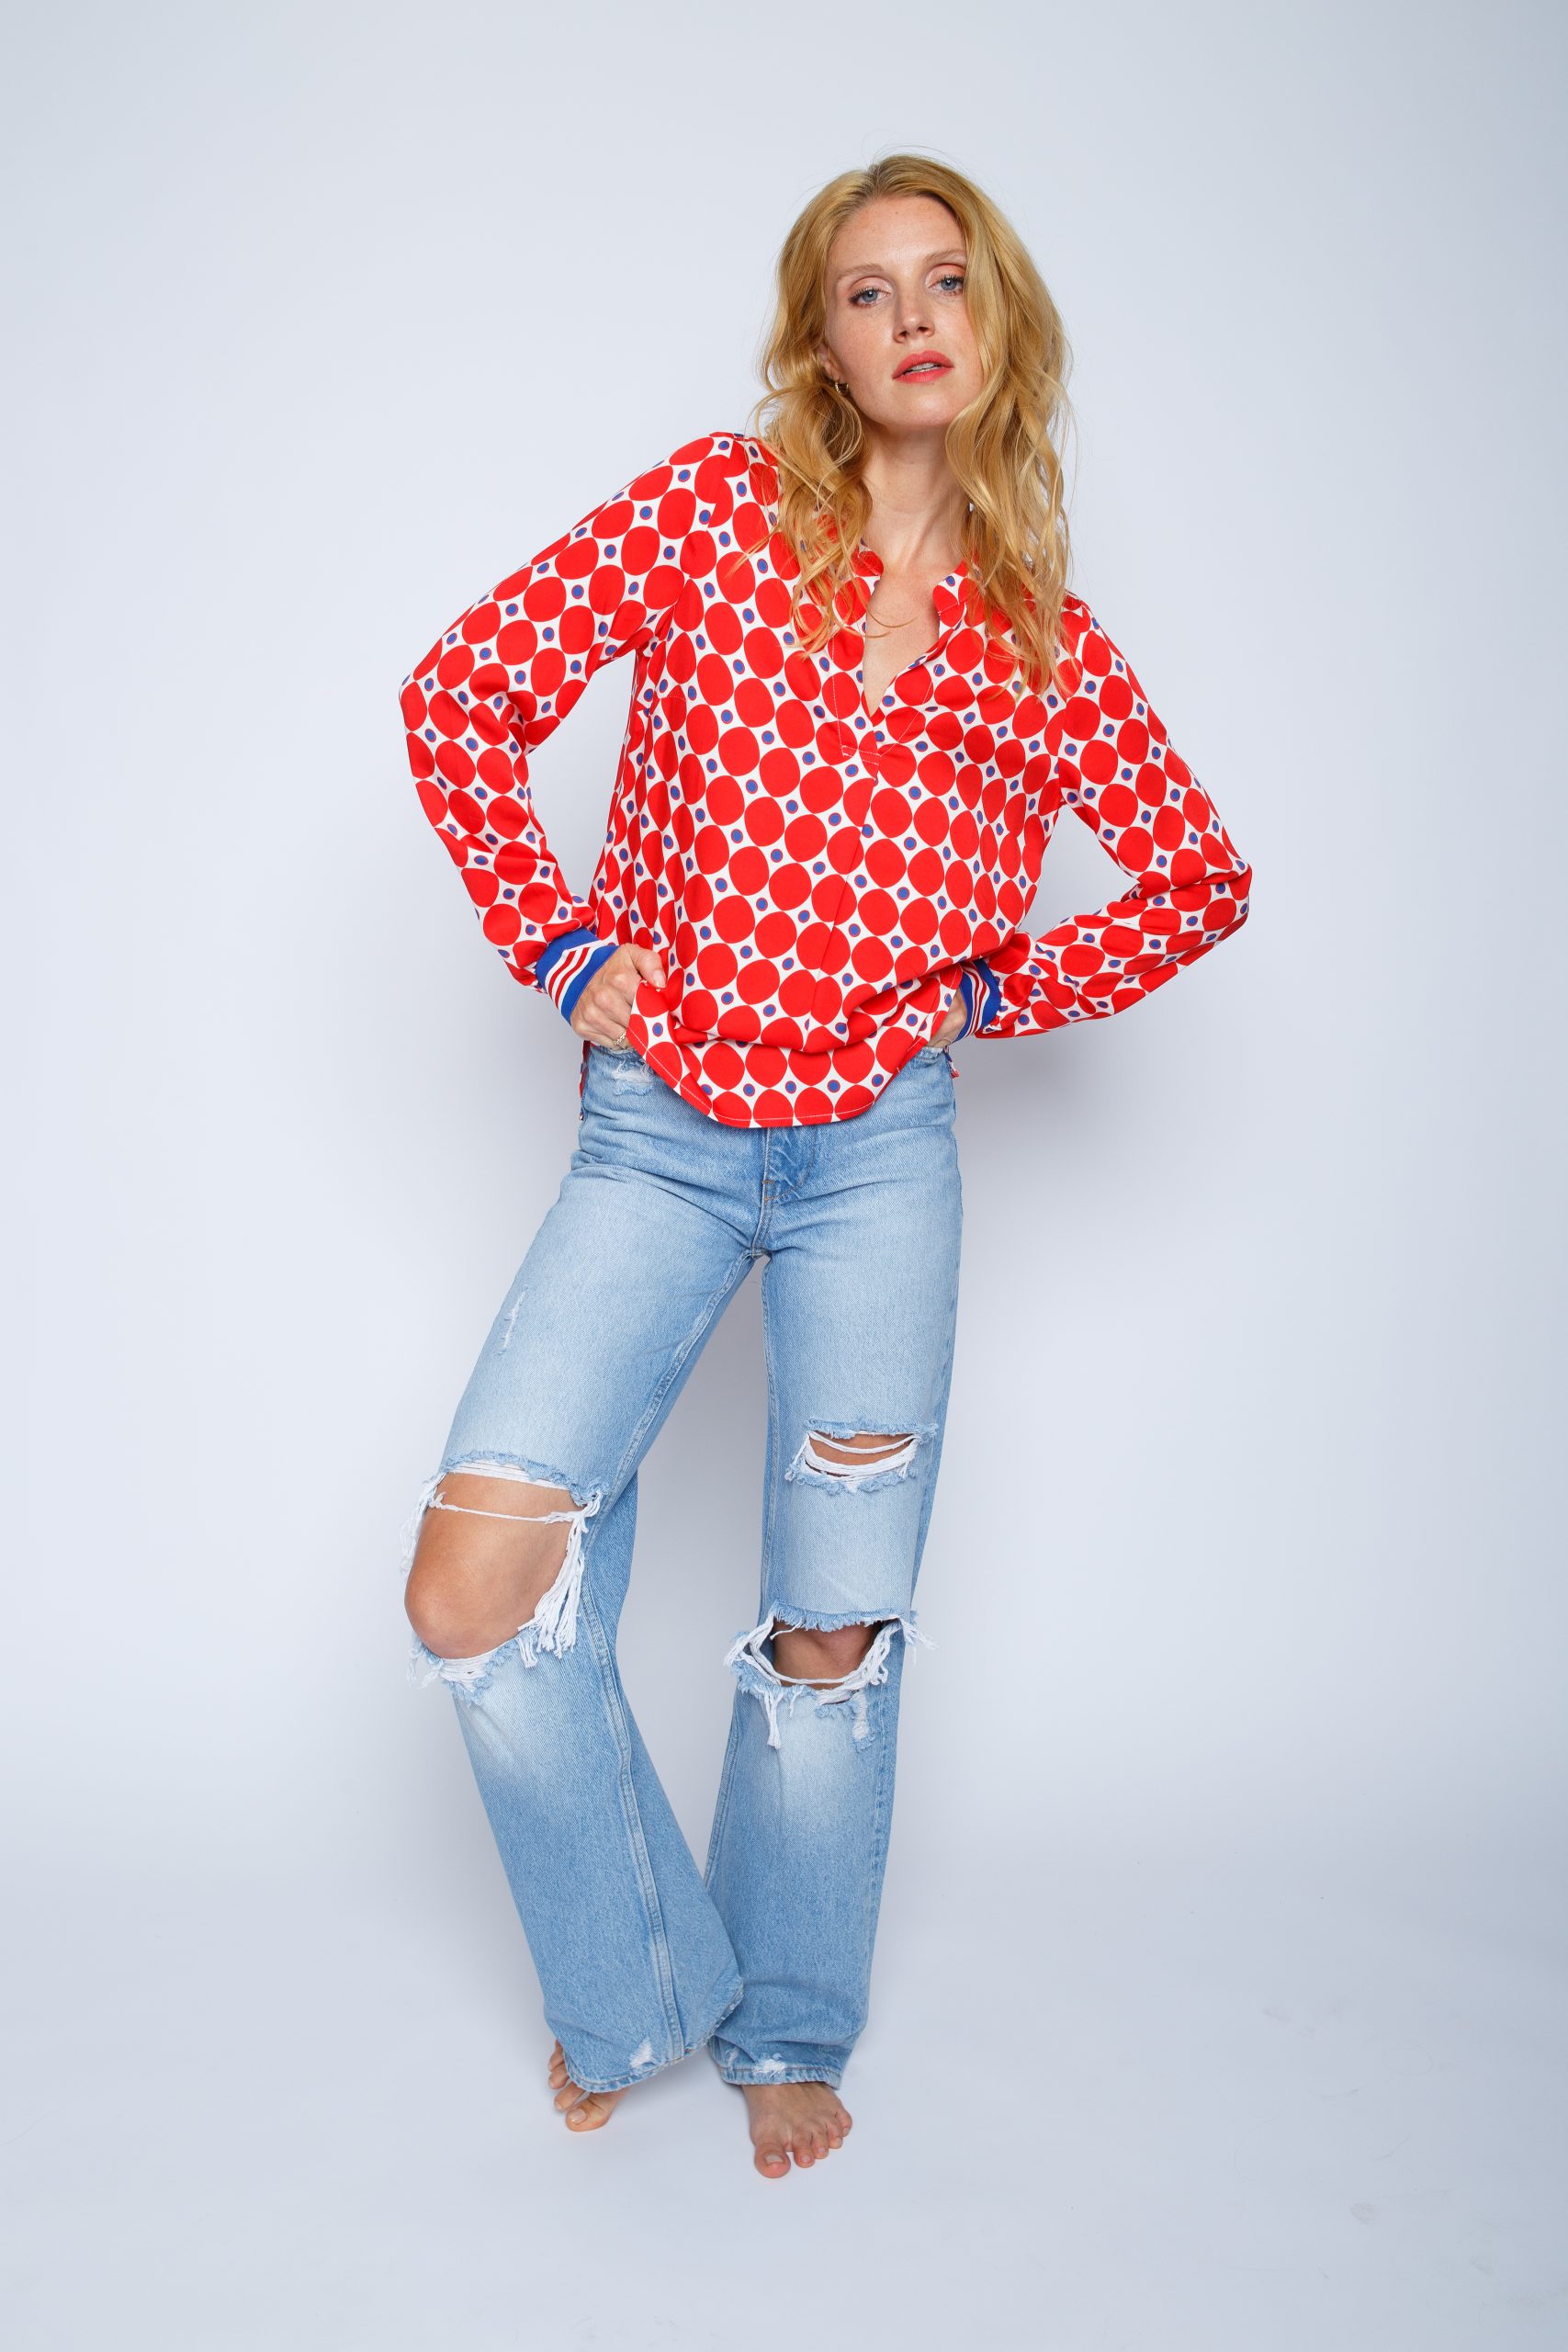 EMILY VAN DEN BERGH Bluse Red Dots 8118-154720 Red 38